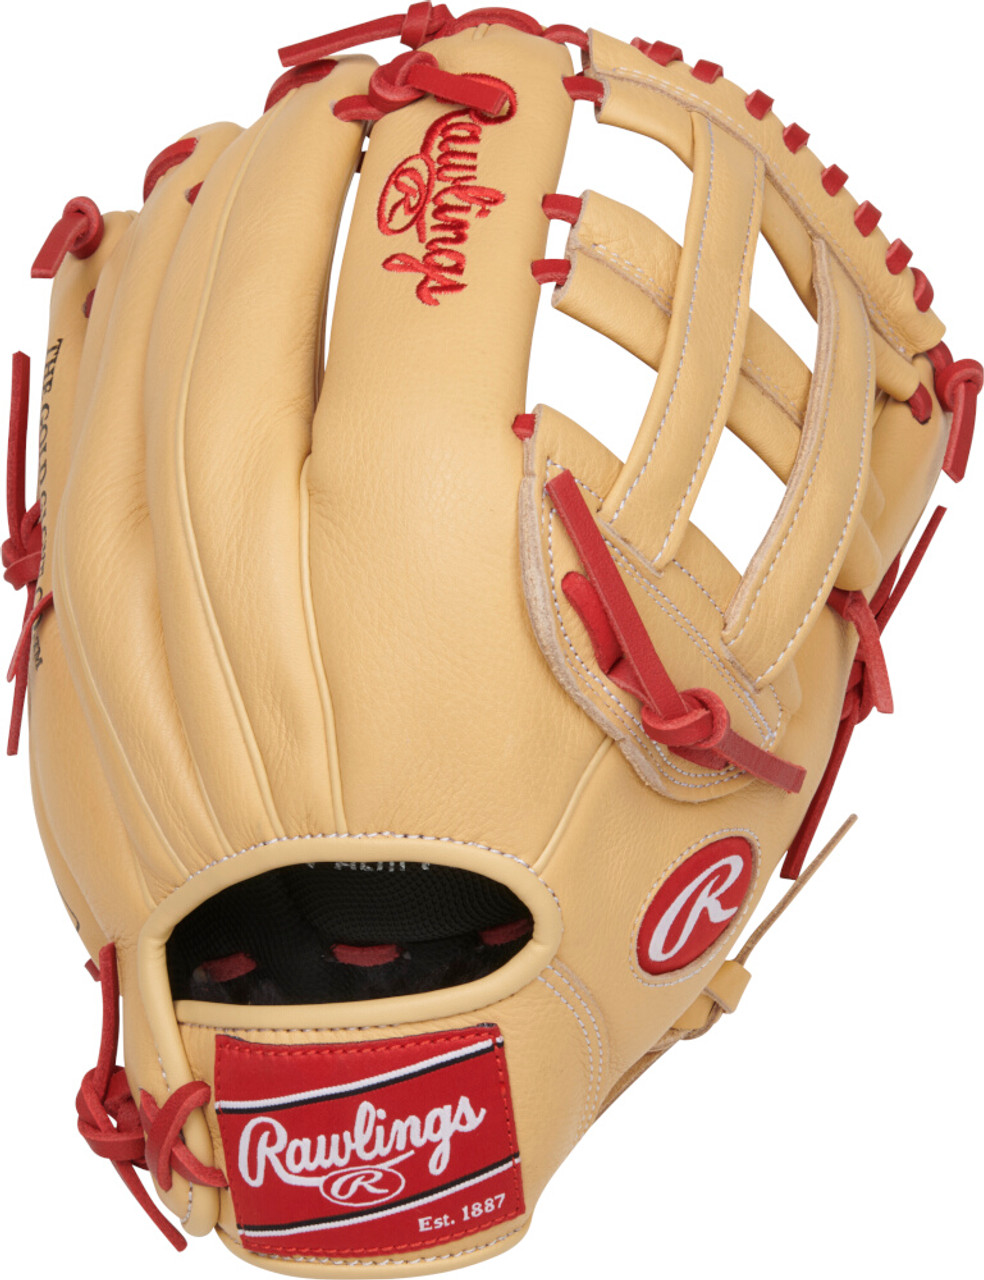 Rawlings Select Pro Lite 11.5-inch Glove - Kris Bryant, Left Hand Throw